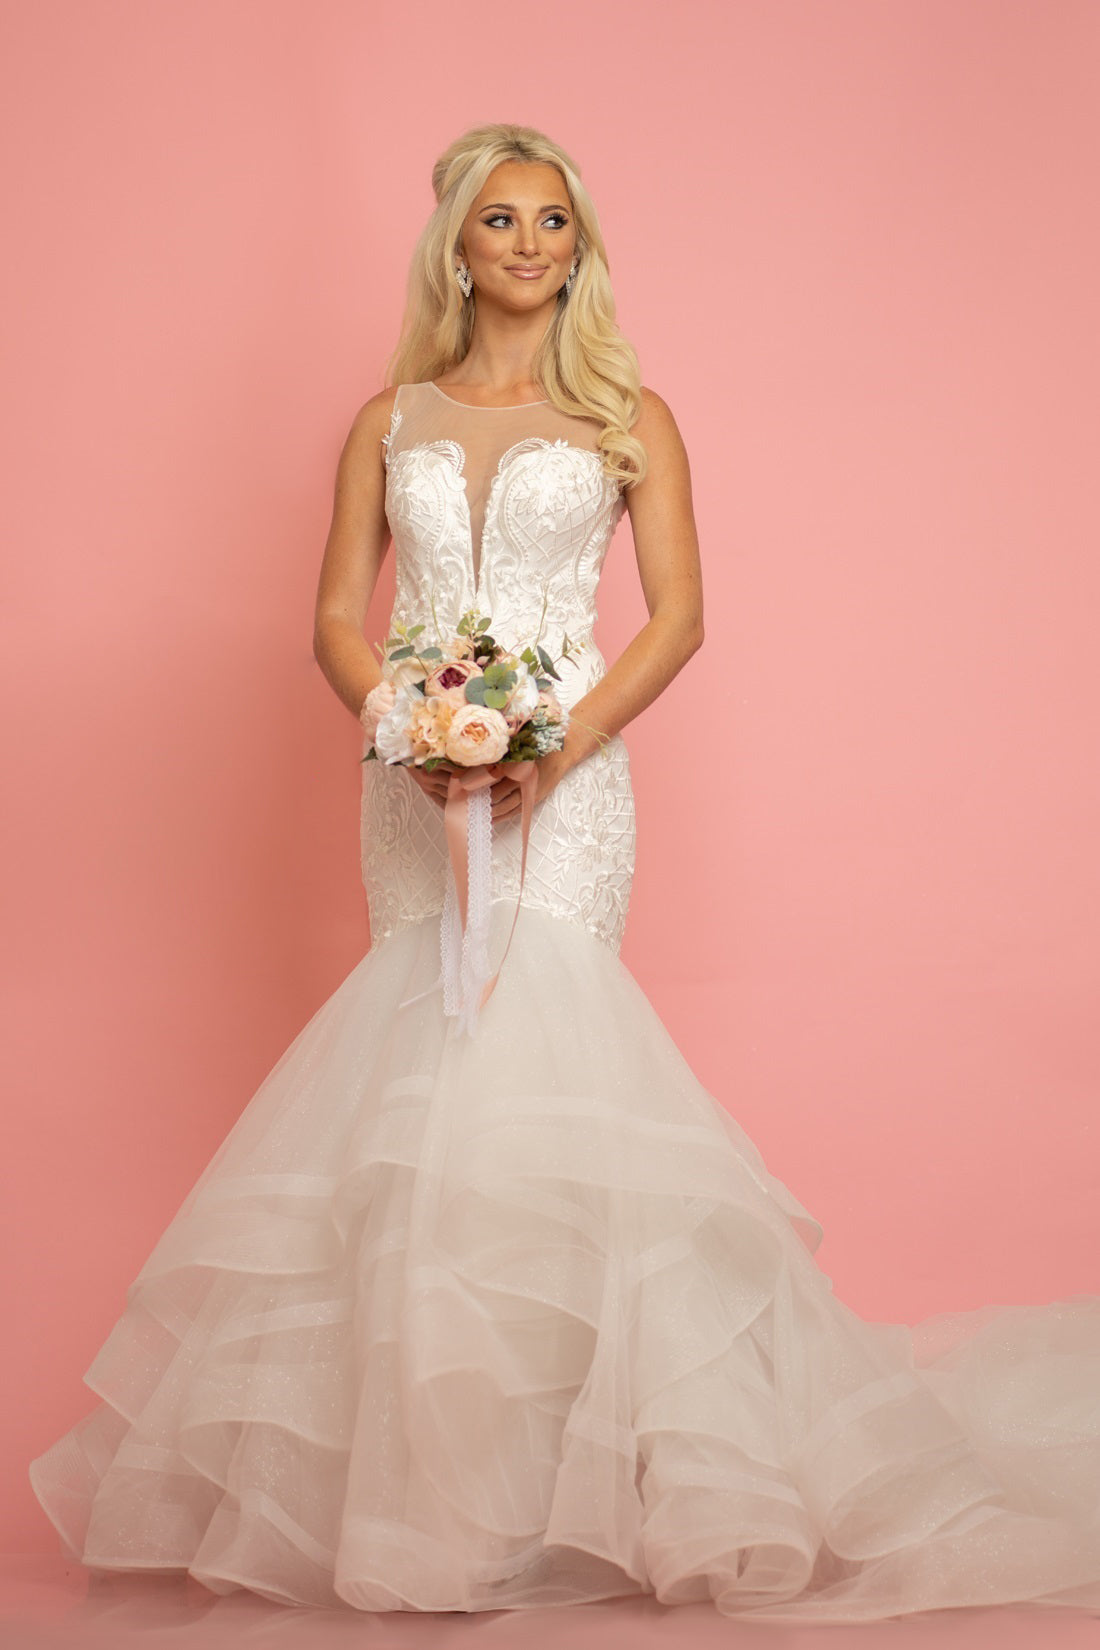 The Johnathan Kaye B314 Size 20 Long Lace Mermaid Wedding Dress is designed for brides who want to make a statement. With a sheer neckline and long train, this dress showcases the elegance of lace and fits perfectly into a mermaid silhouette. The Johnathan Kaye B314 gives you the perfect combination of grace and sophistication.  Size: 20  Color: White Shimmer